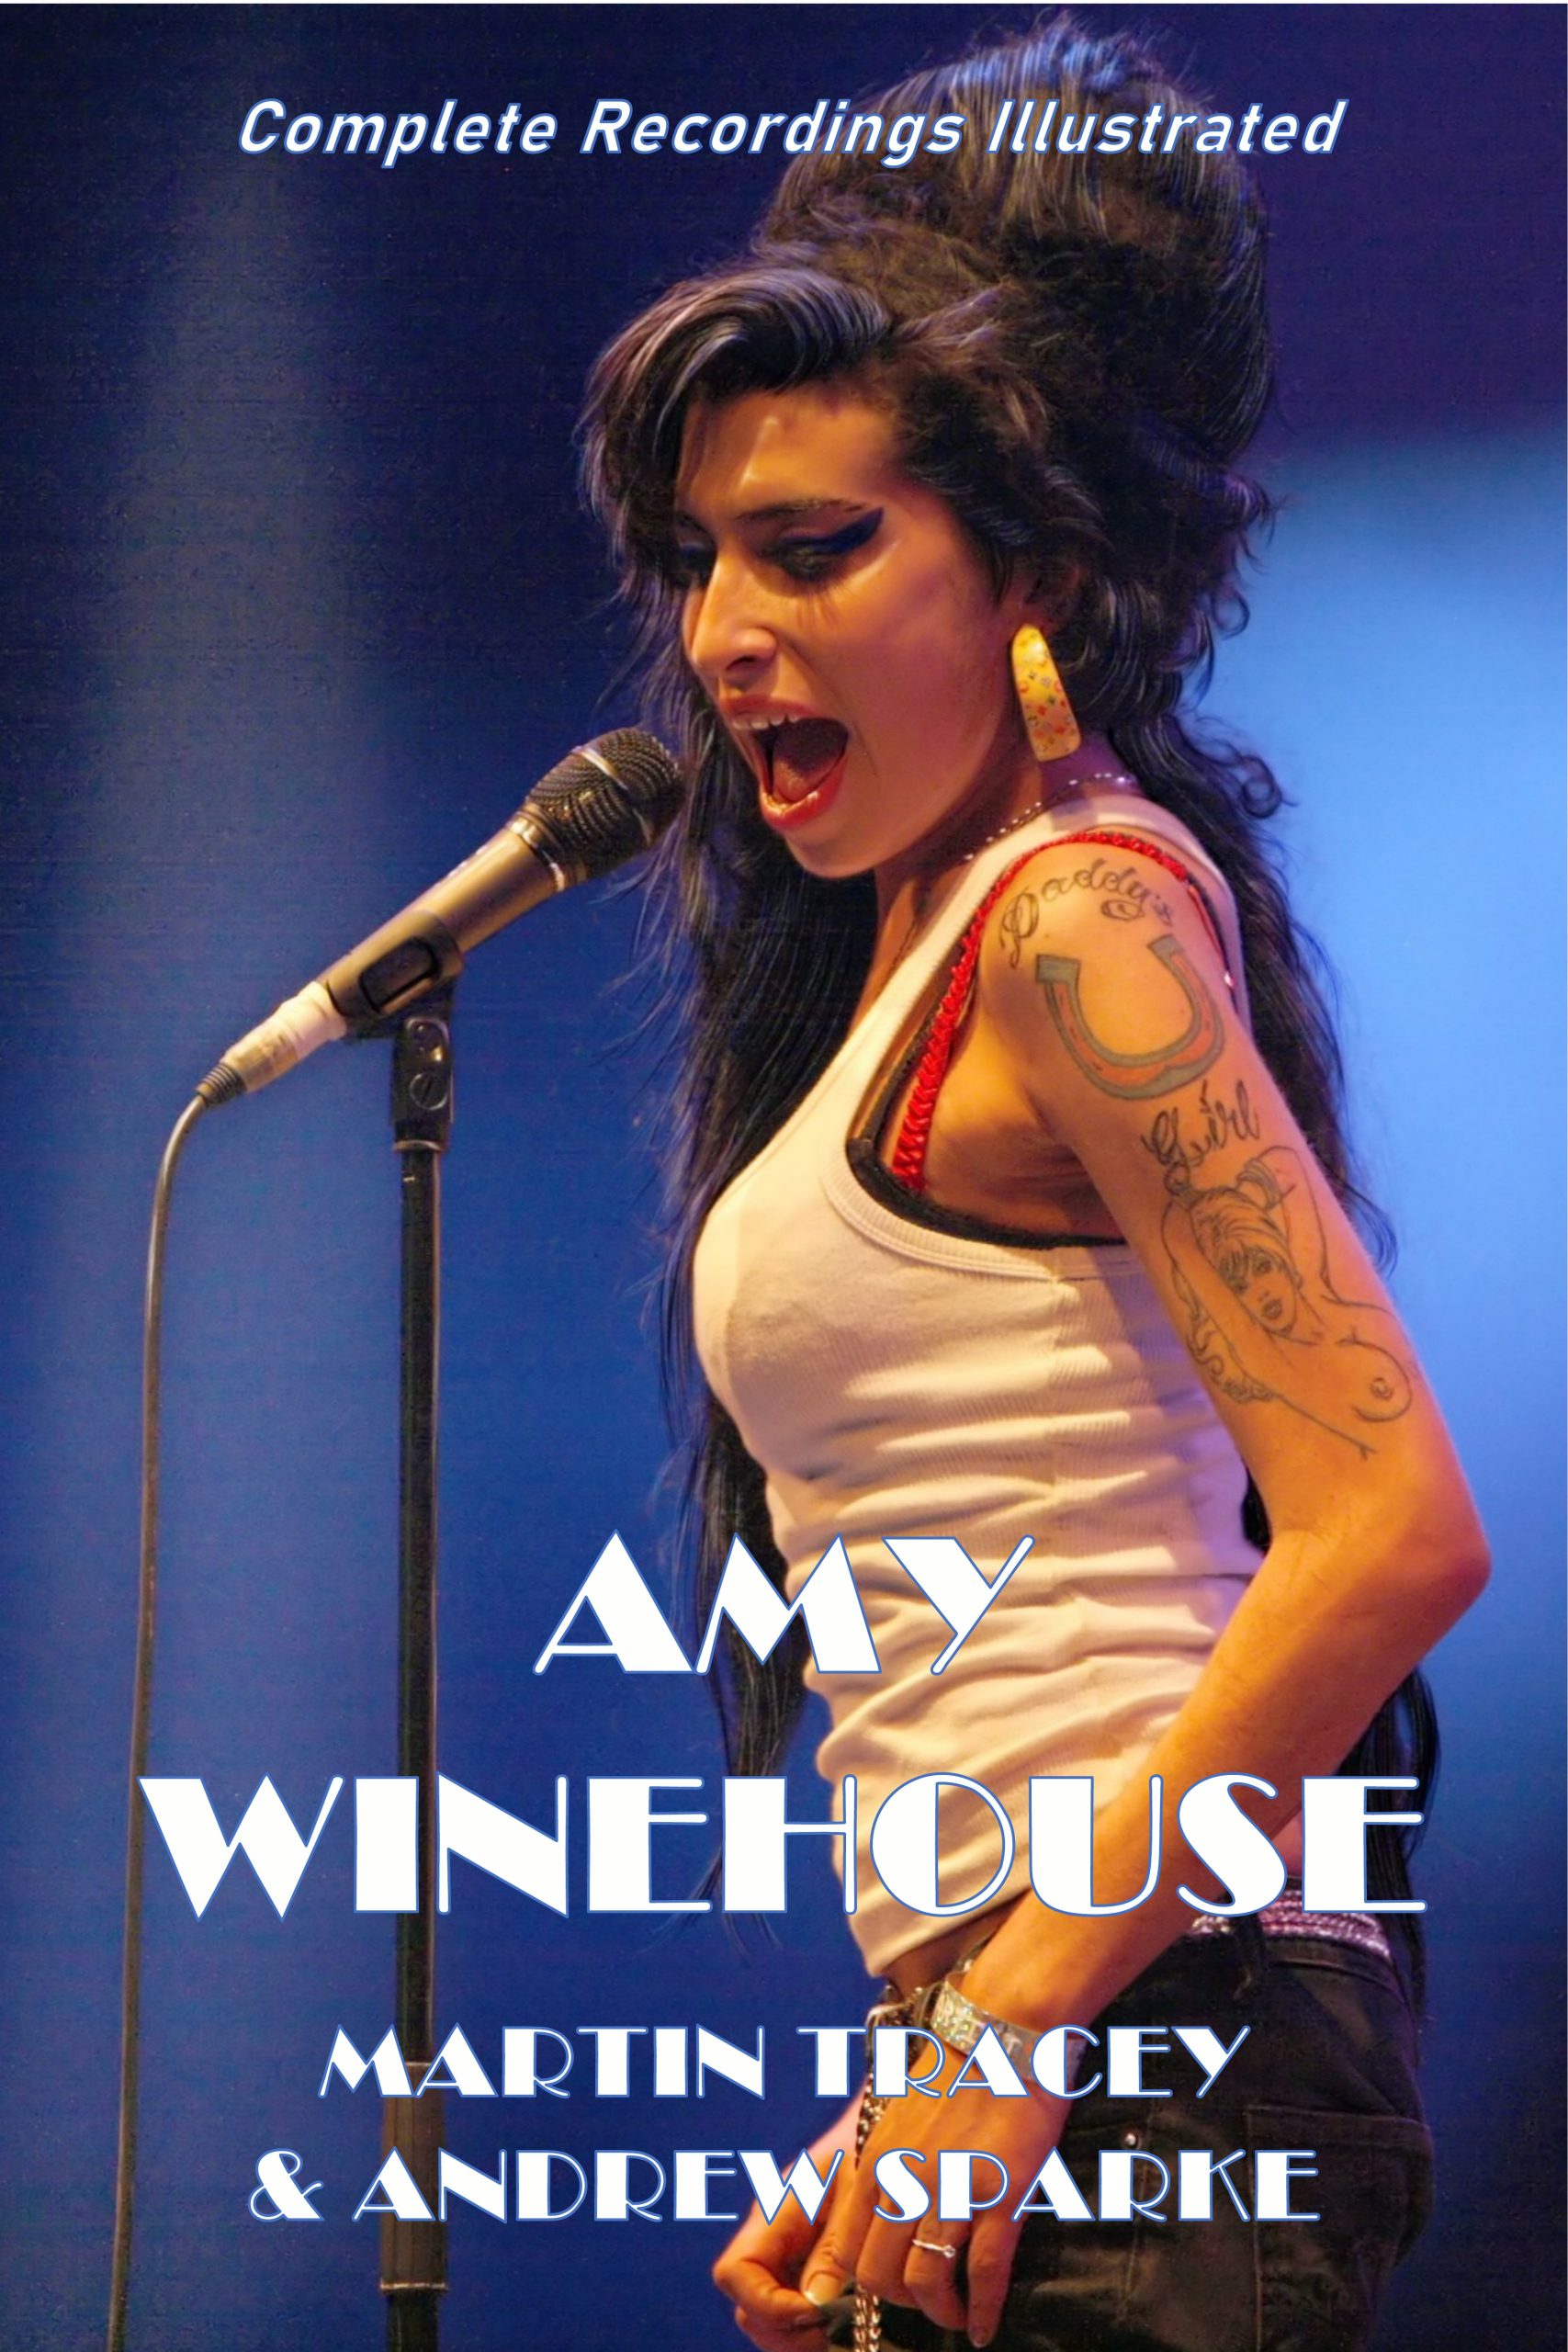 book cover discography Amy Winehouse 